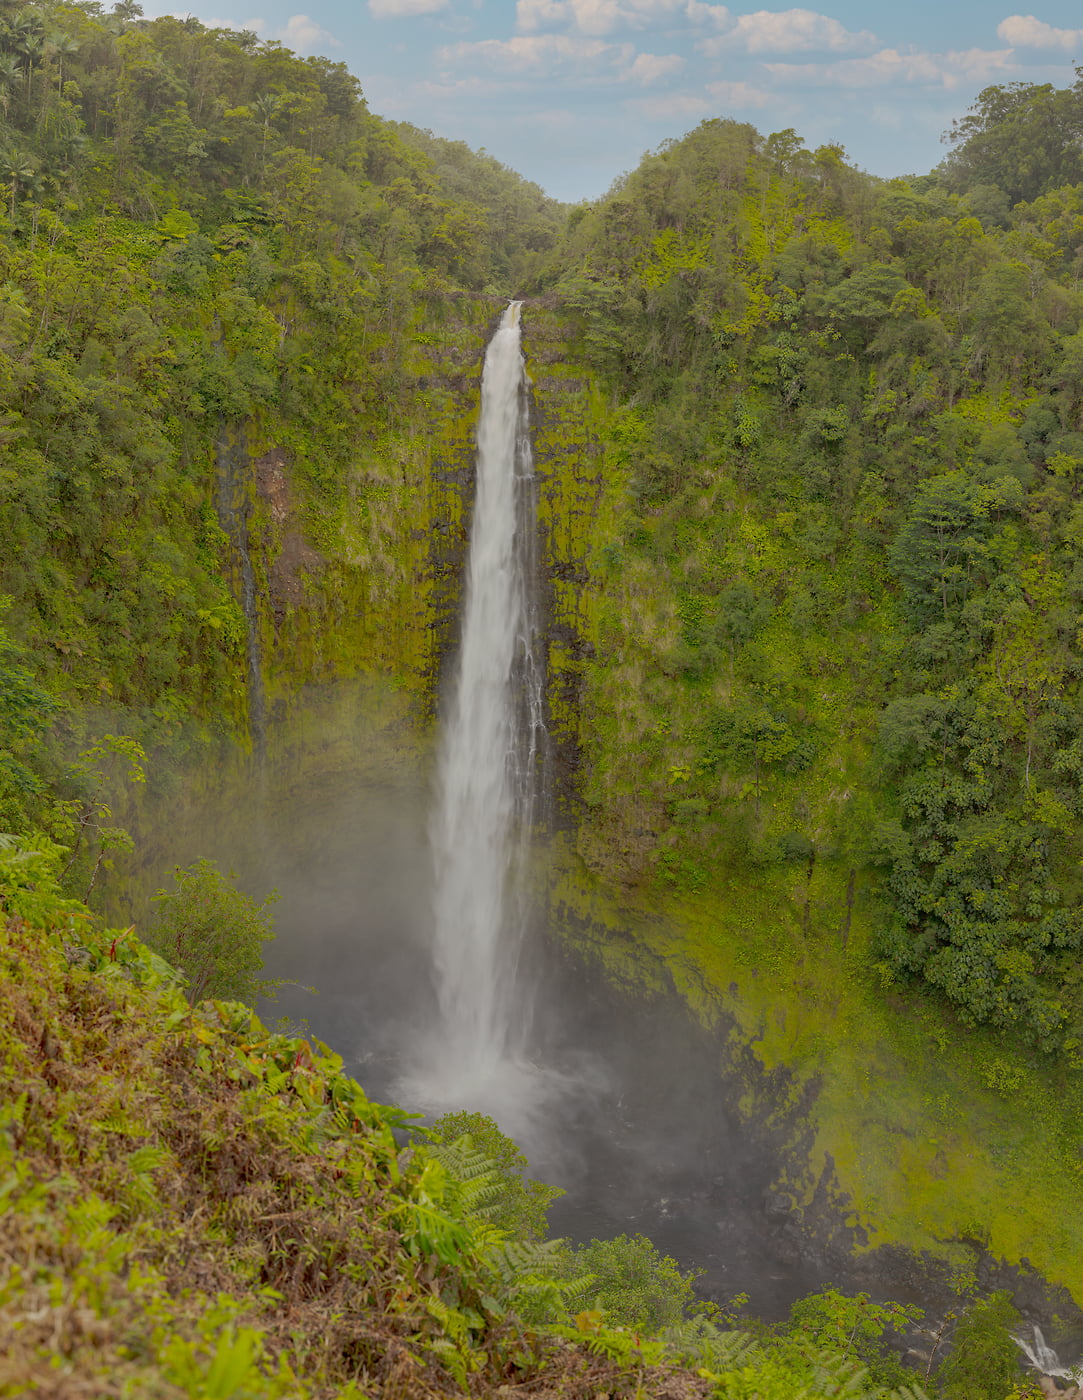 548 megapixels! A very high resolution, large-format VAST photo print of a waterfall surrounded by a lush jungle; nature photograph created by John Freeman in Akaka Falls State Park, Big Island, Hawaii.